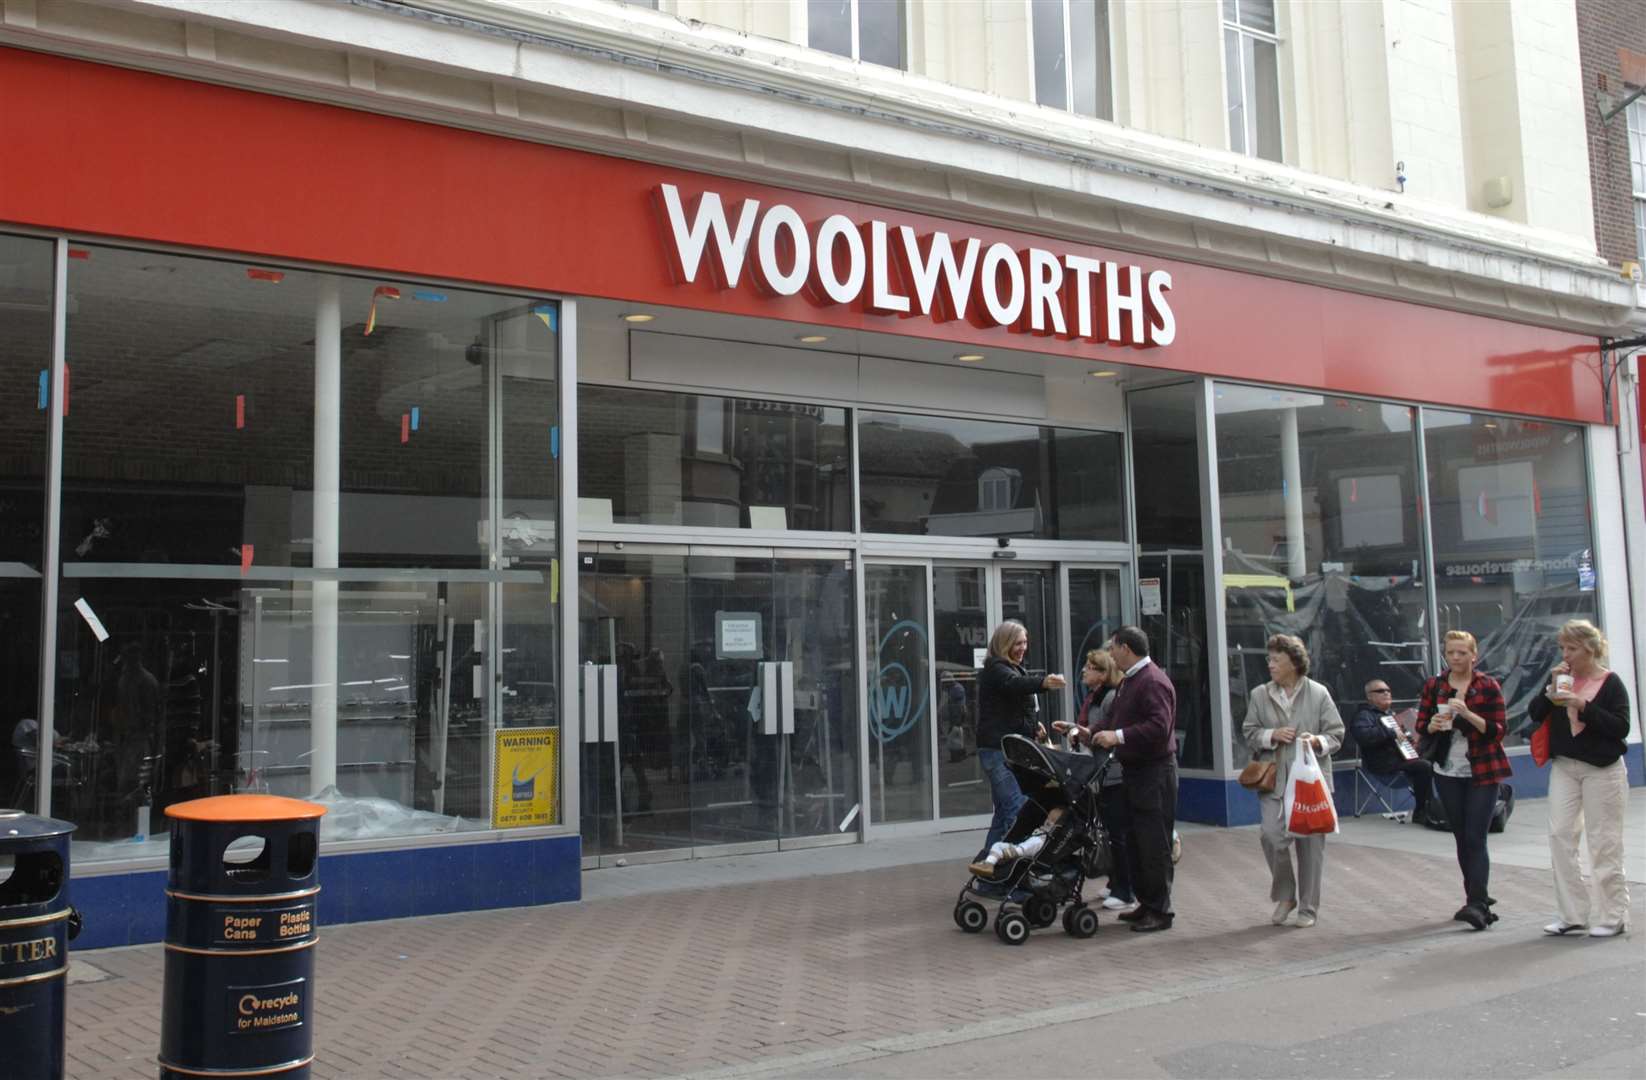 Woolworths reportedly introduced the concept of pick and mix